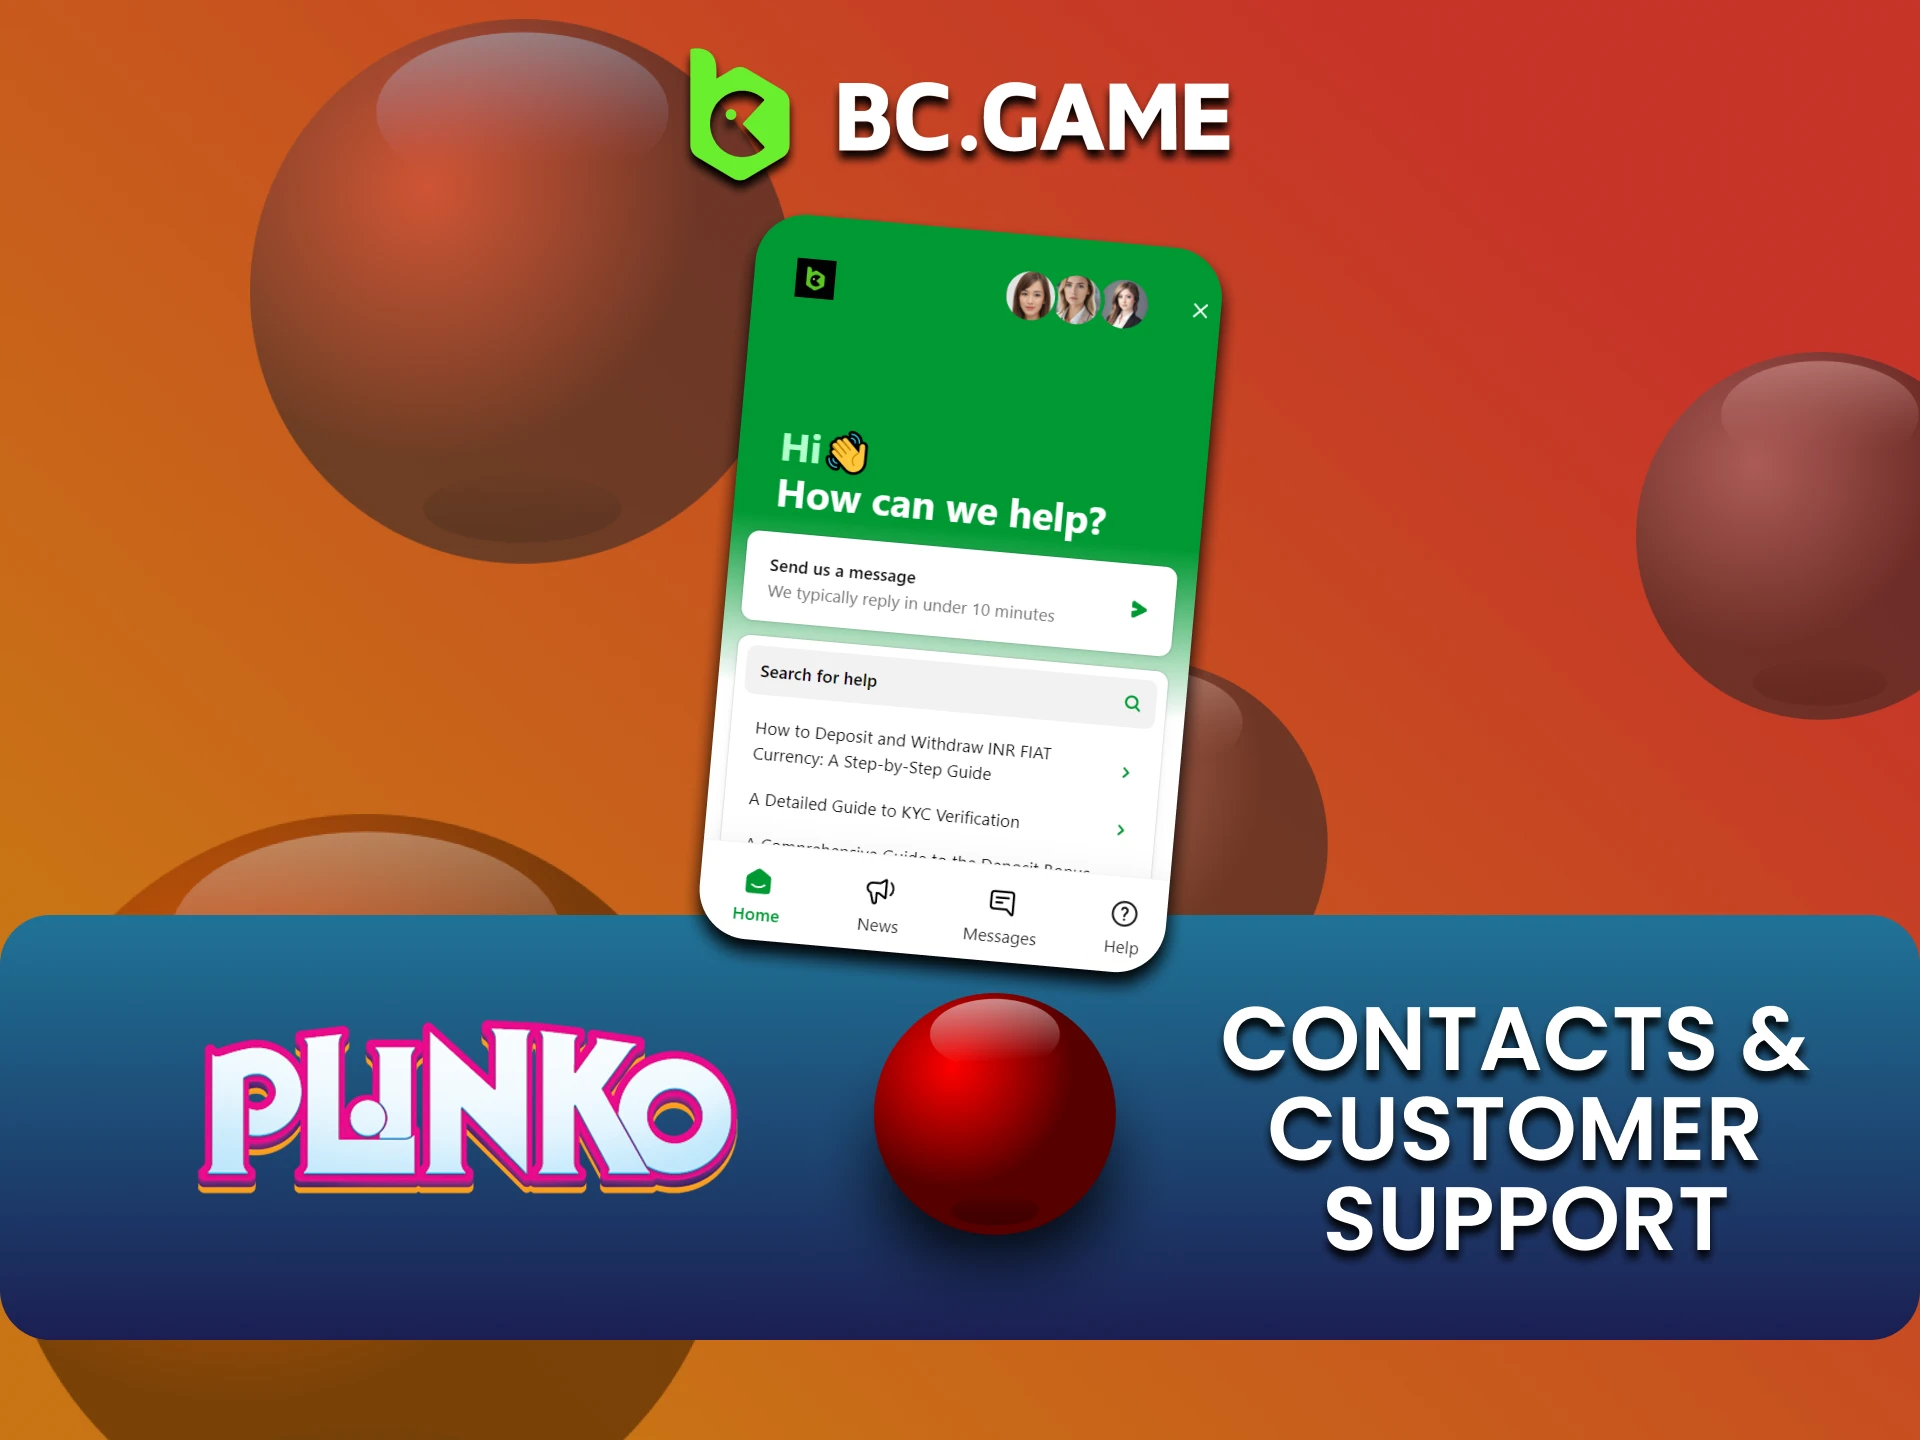 We'll show you how to contact the BCGame team for the Plinko game.